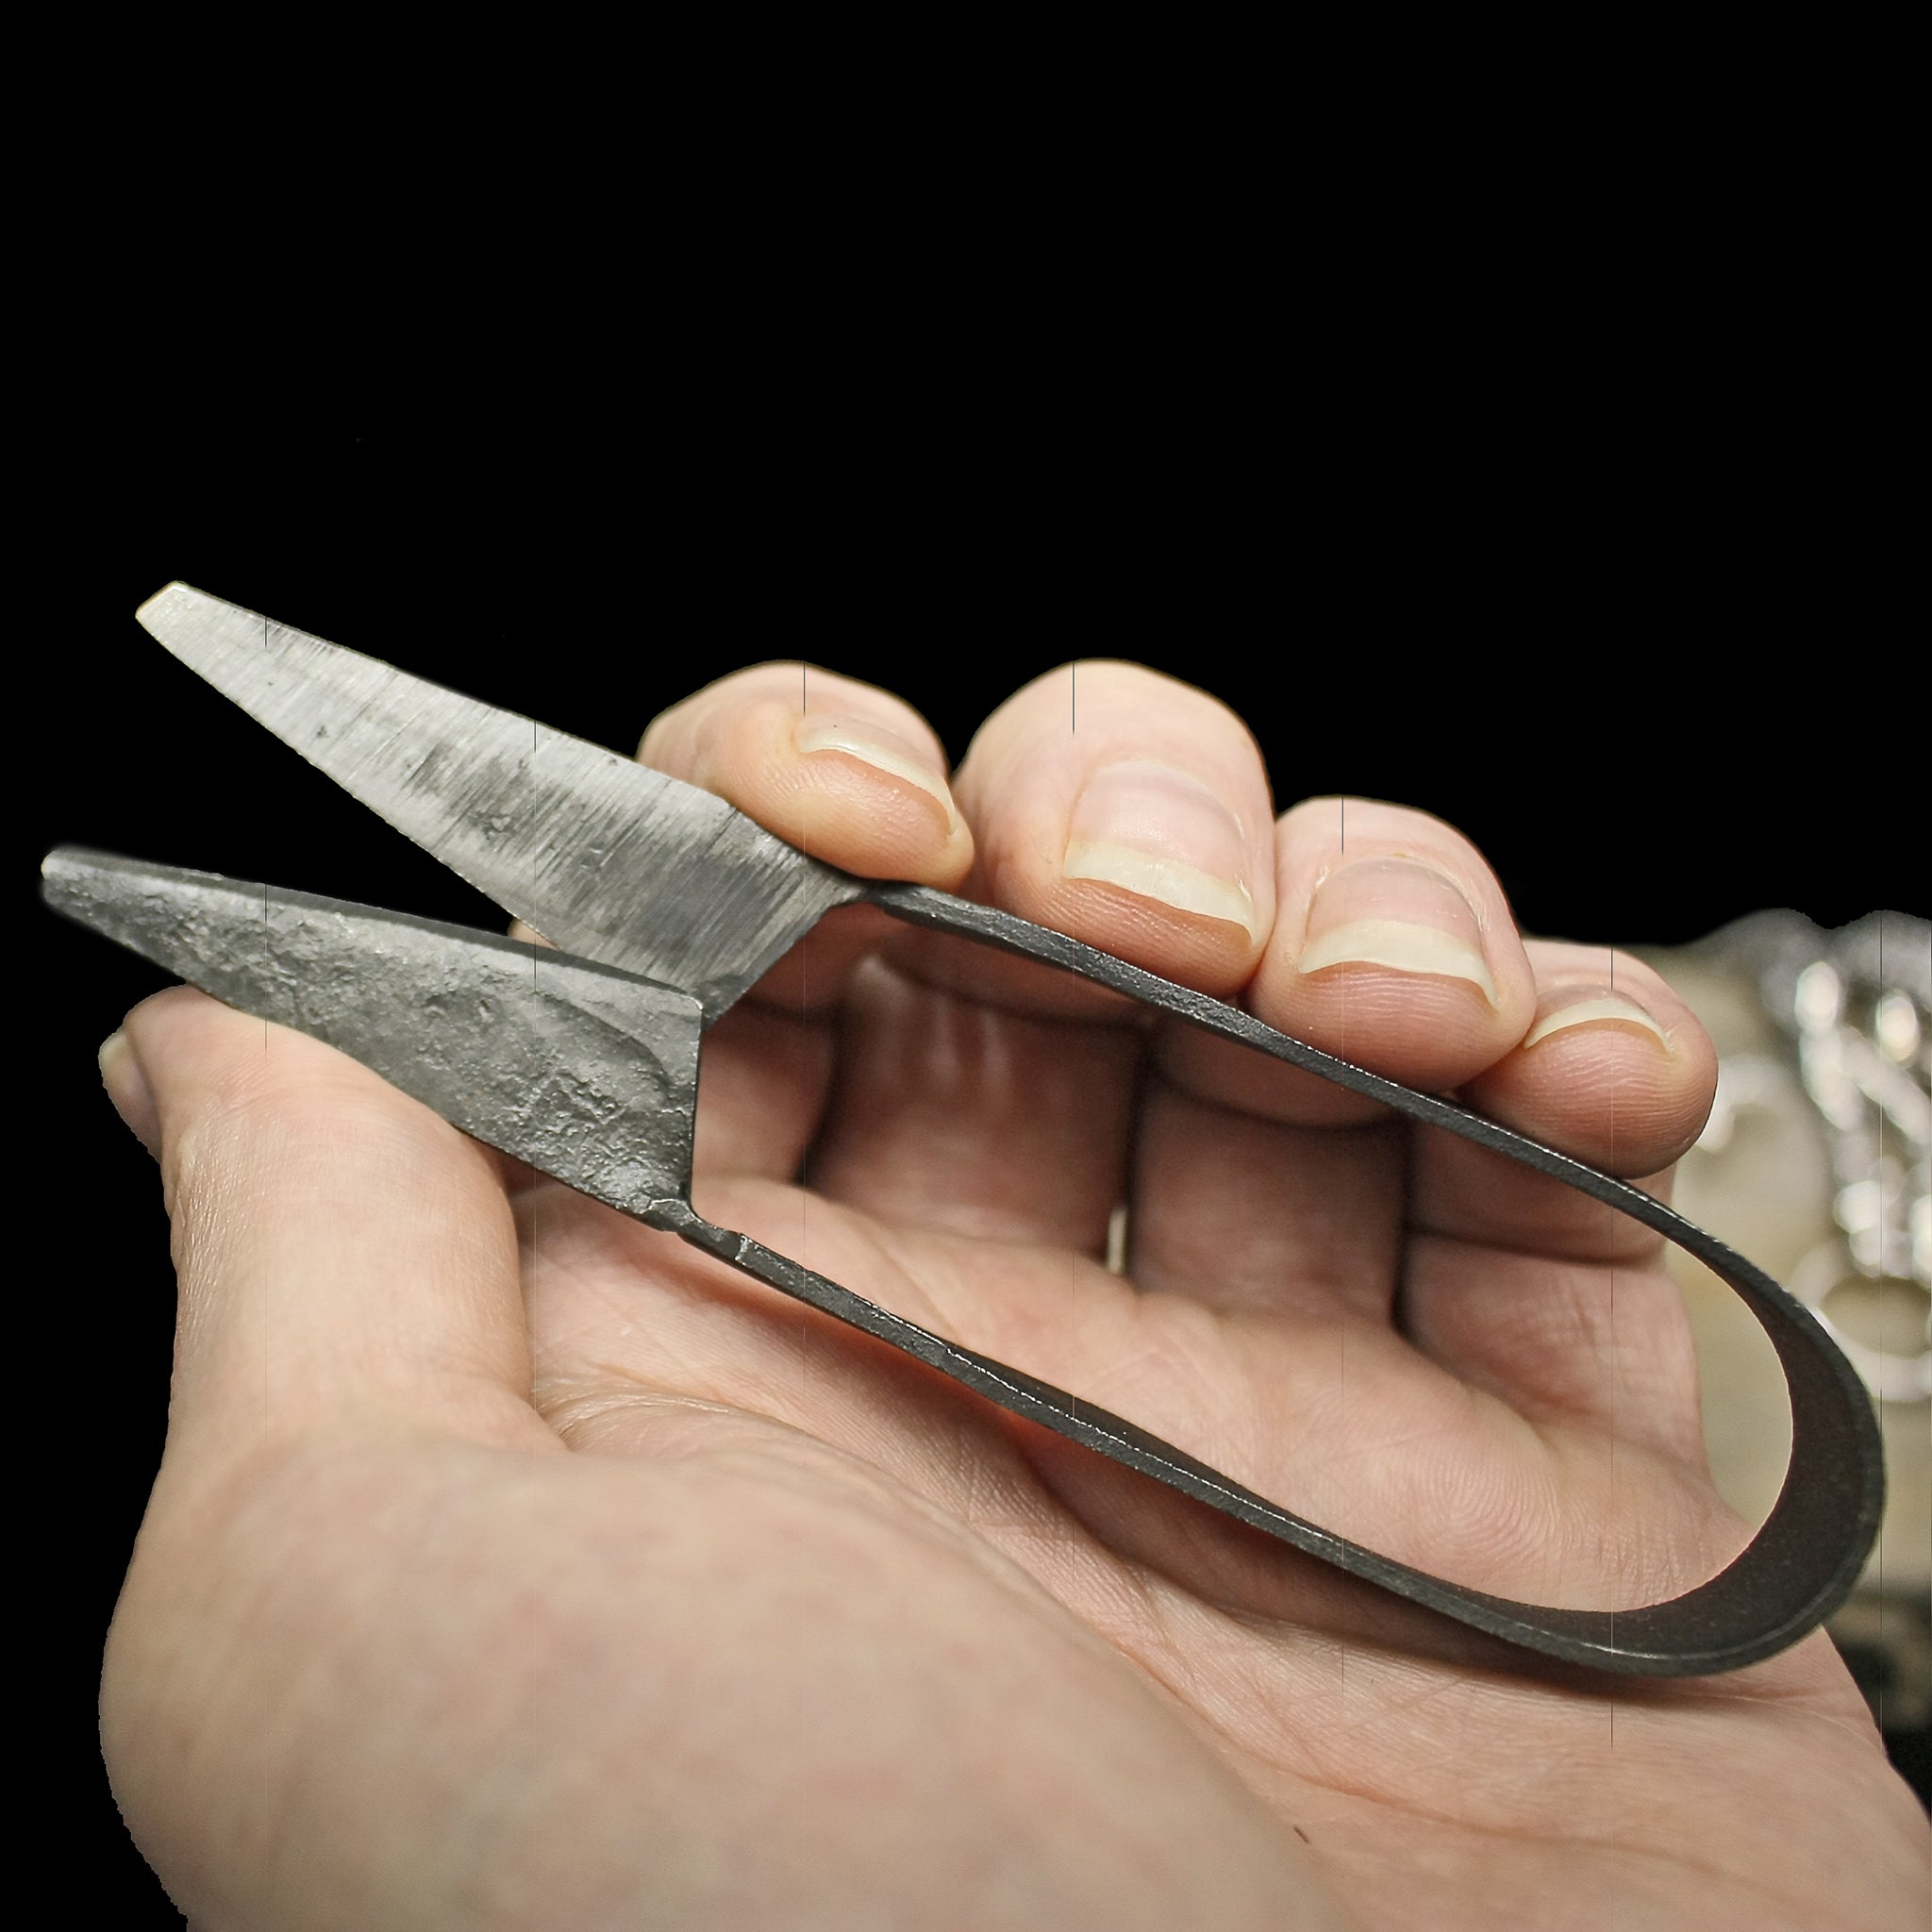 Small Iron Age Snips in Hand